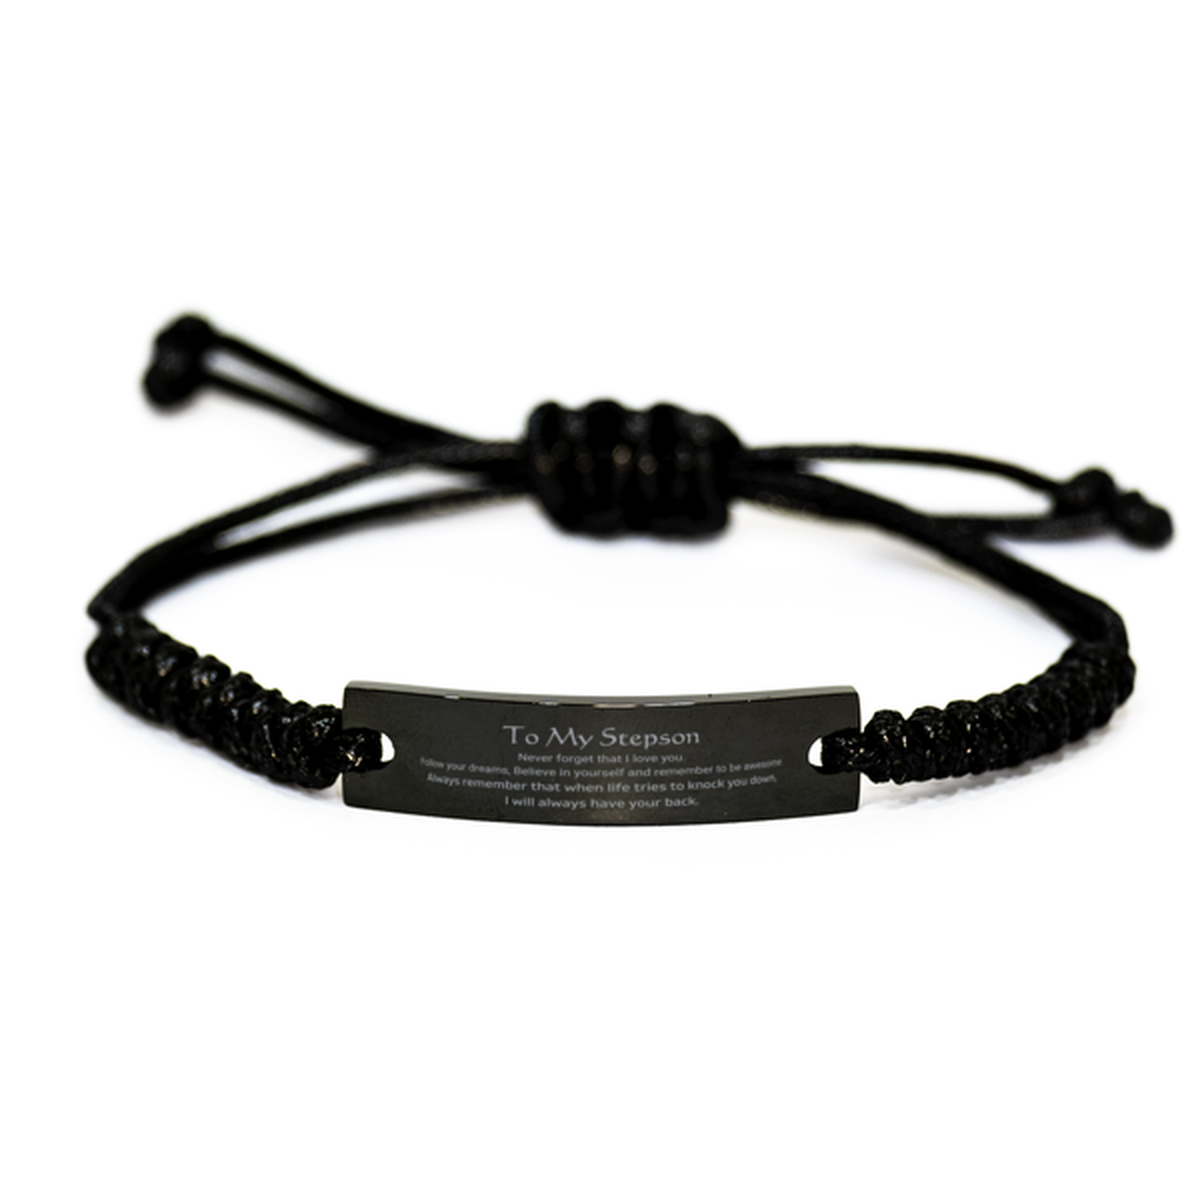 Inspirational Gifts for Stepson, Follow your dreams, Believe in yourself, Stepson Black Rope Bracelet, Birthday Christmas Unique Gifts For Stepson